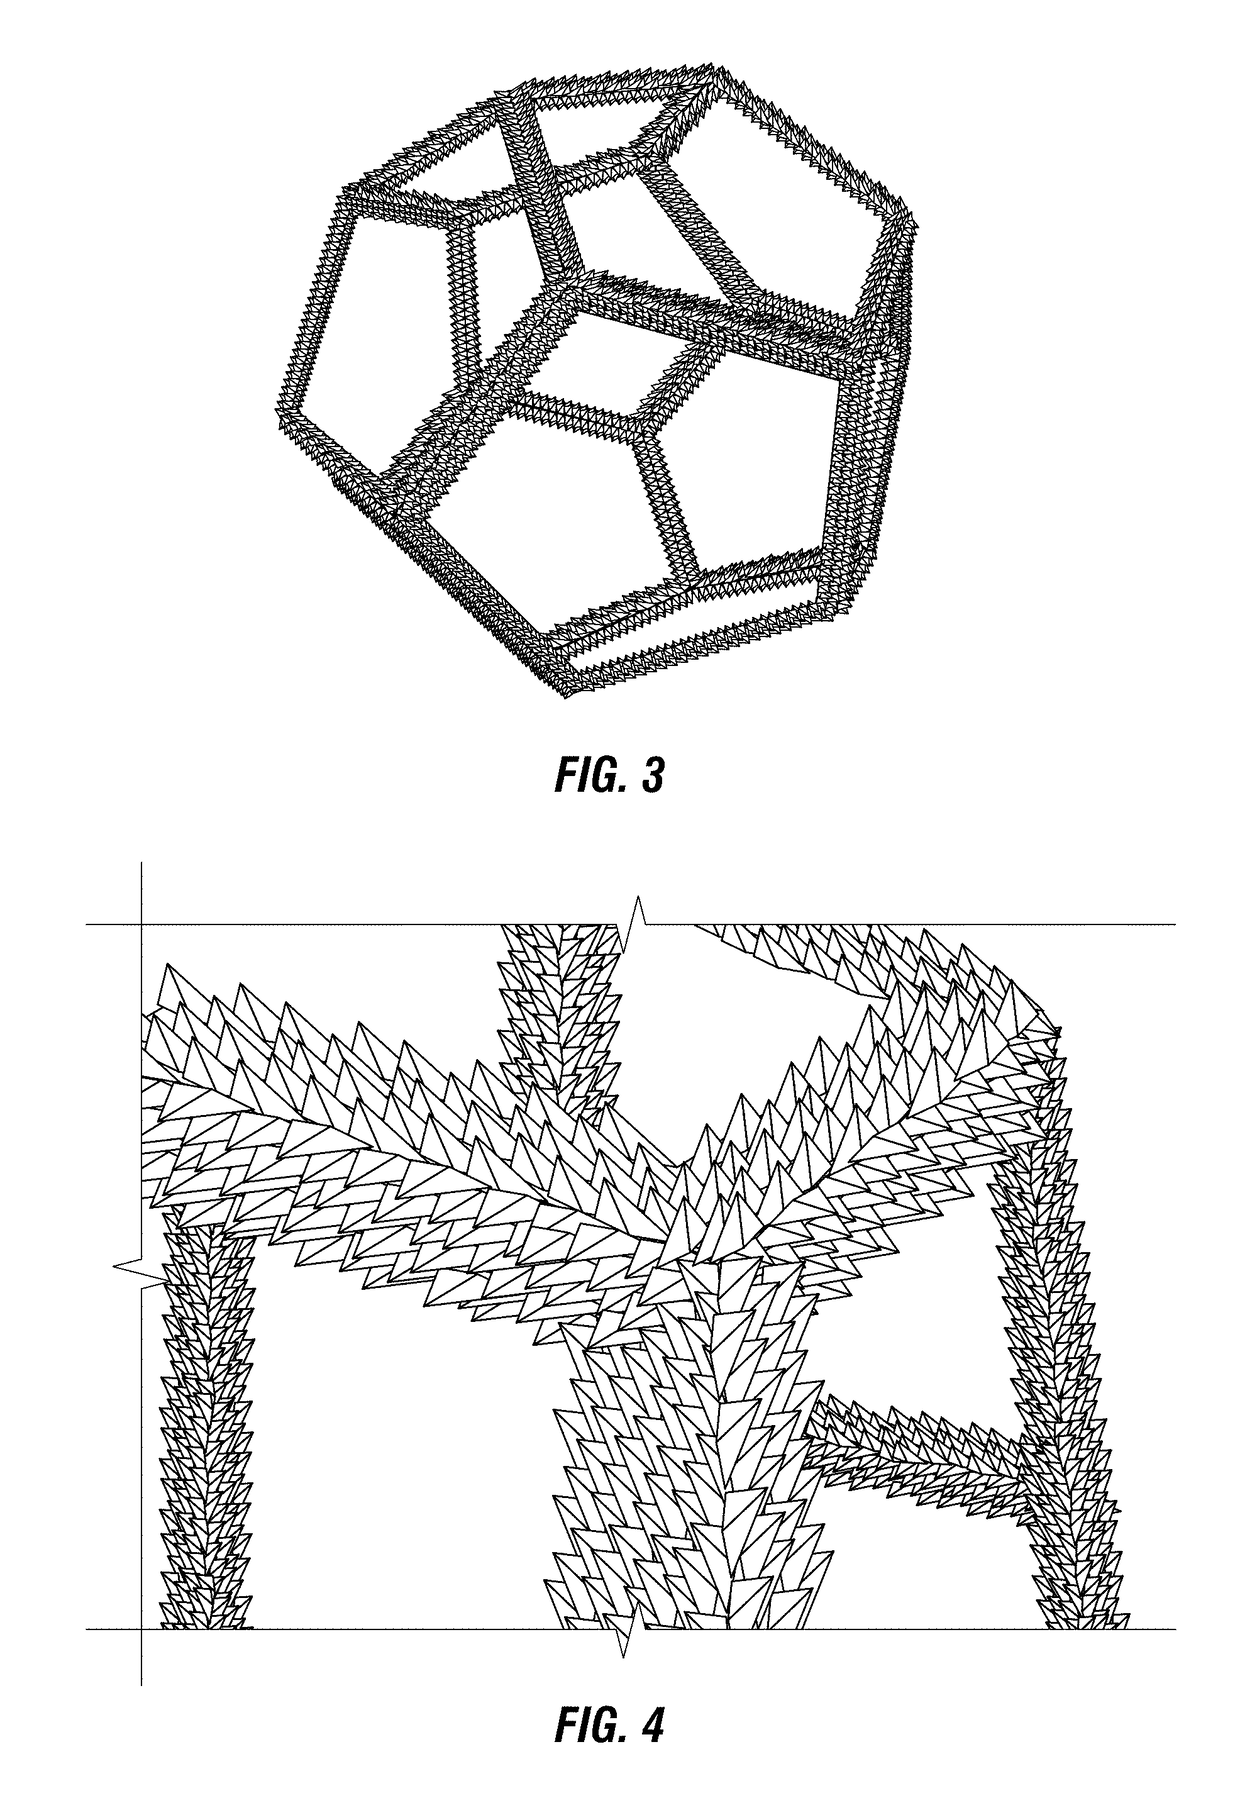 Structured elements and methods of use